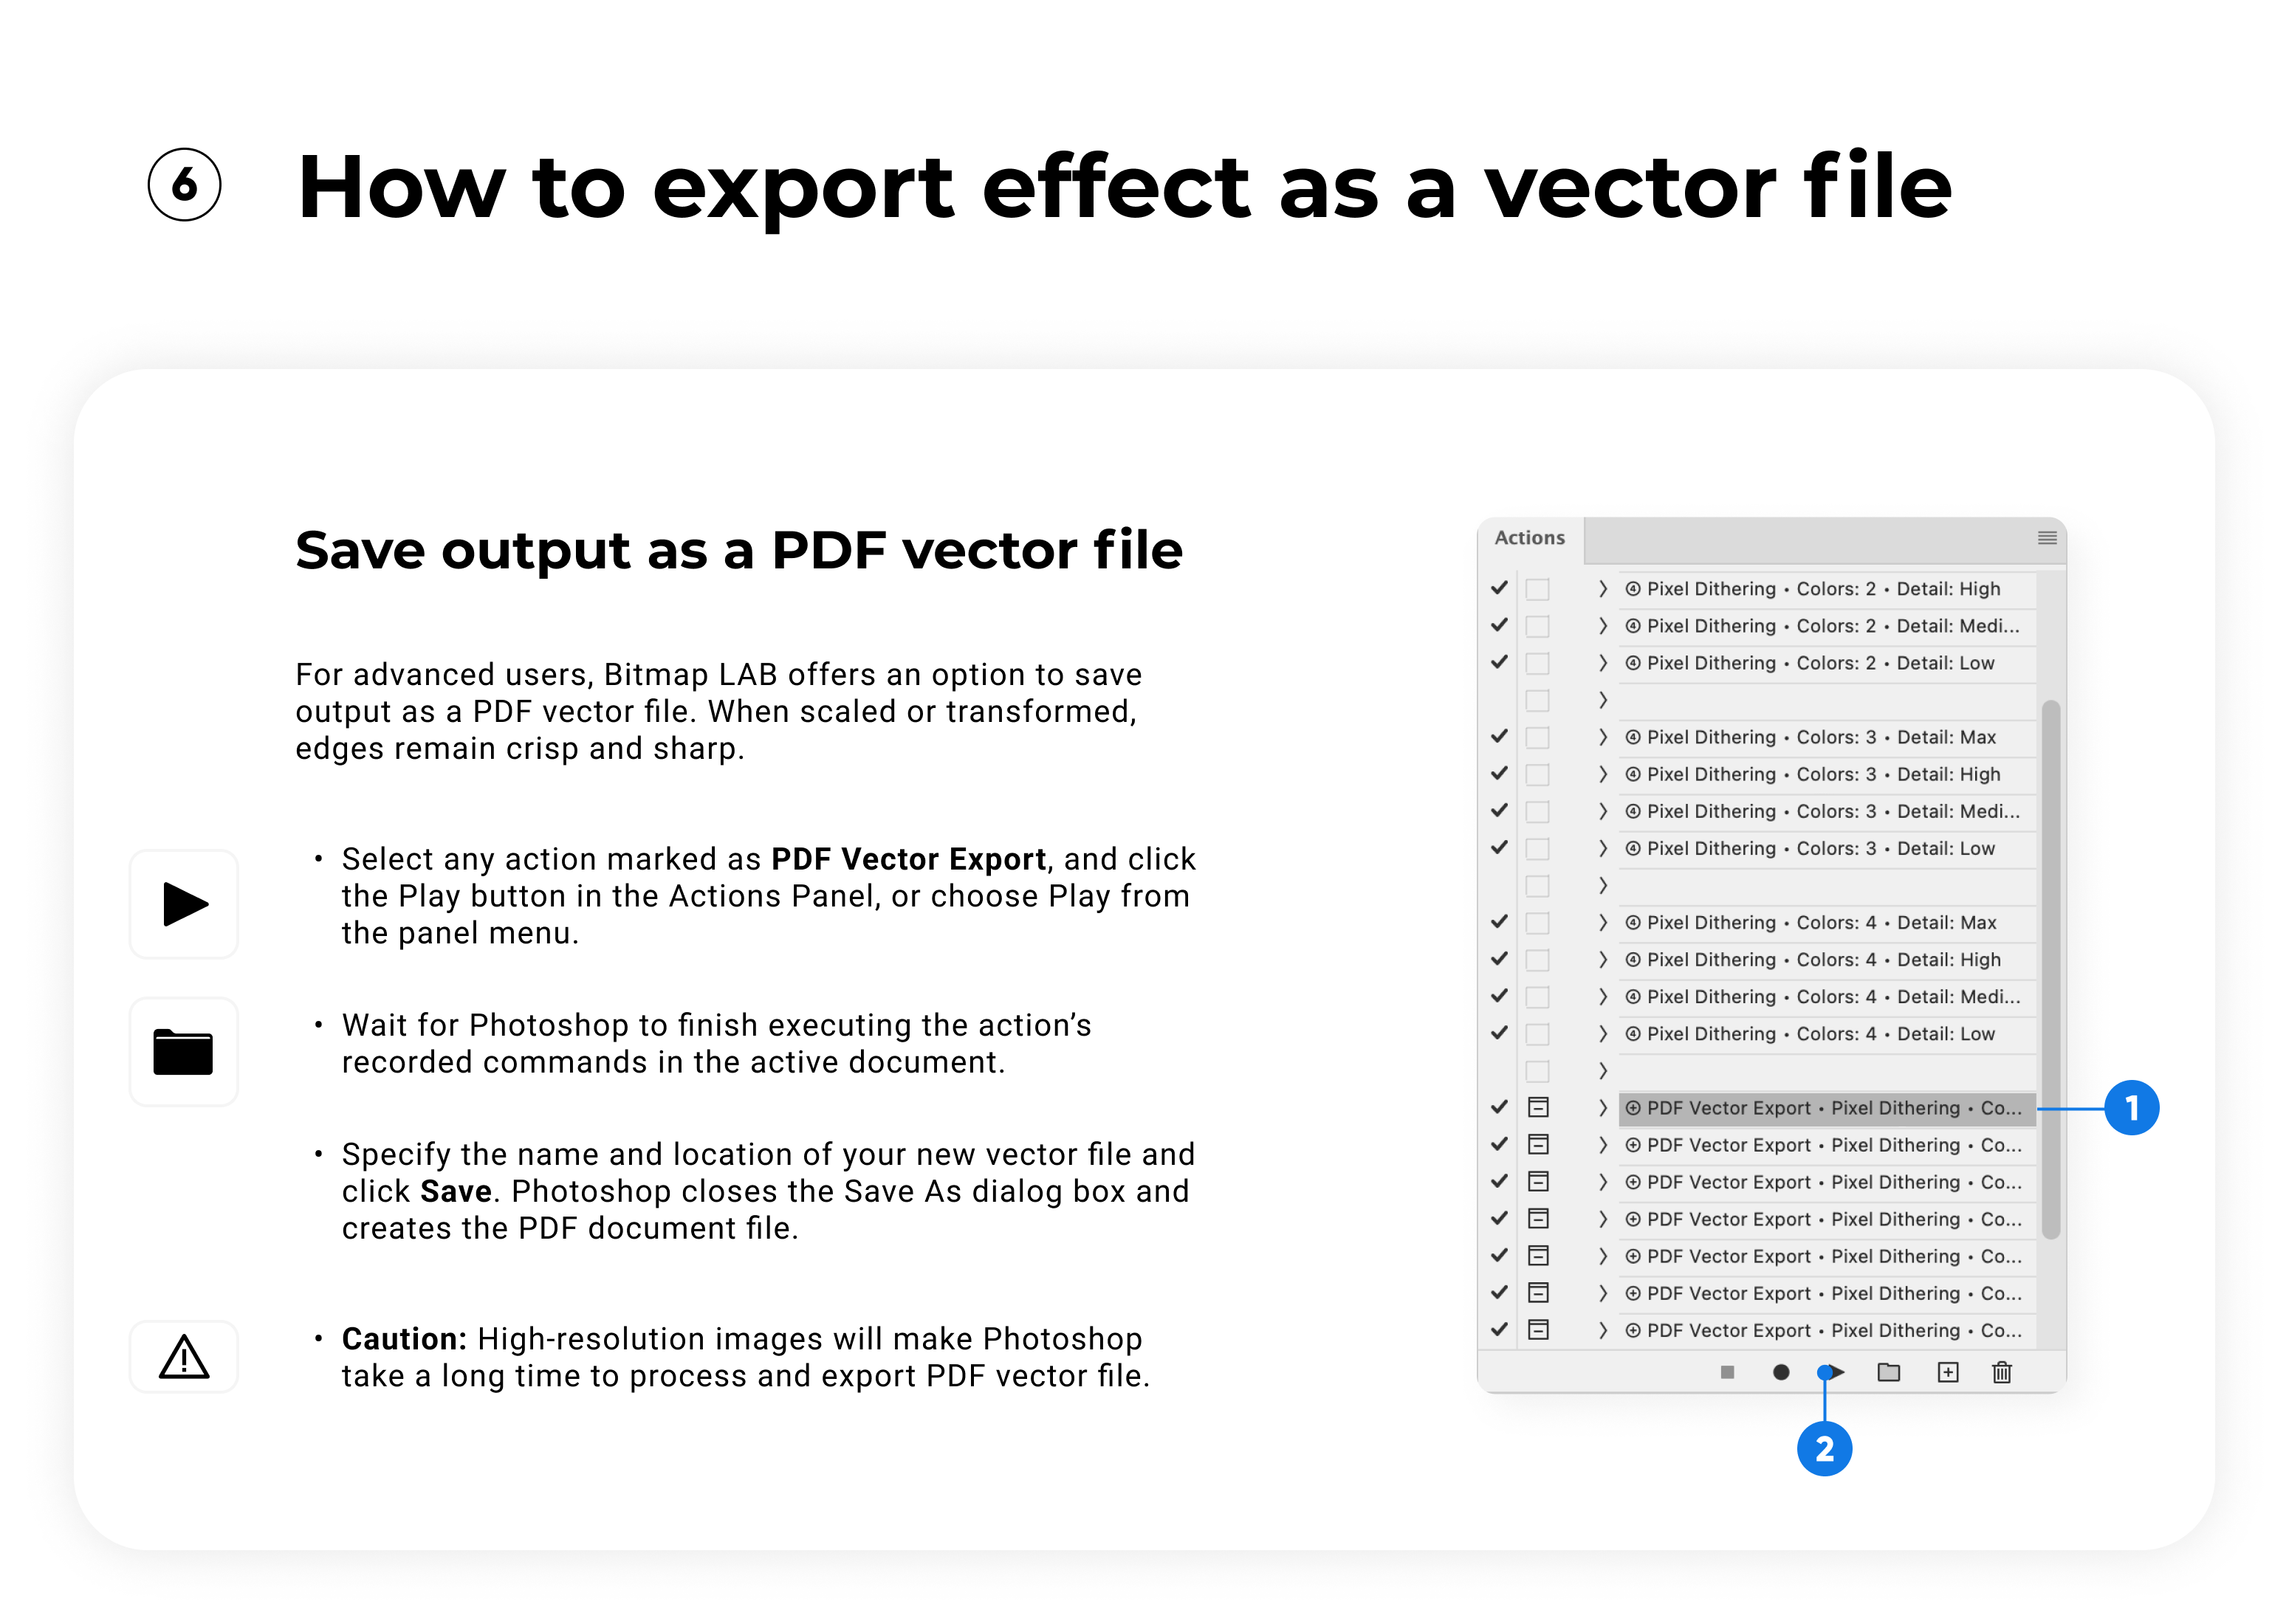 How to export effect as a vector file